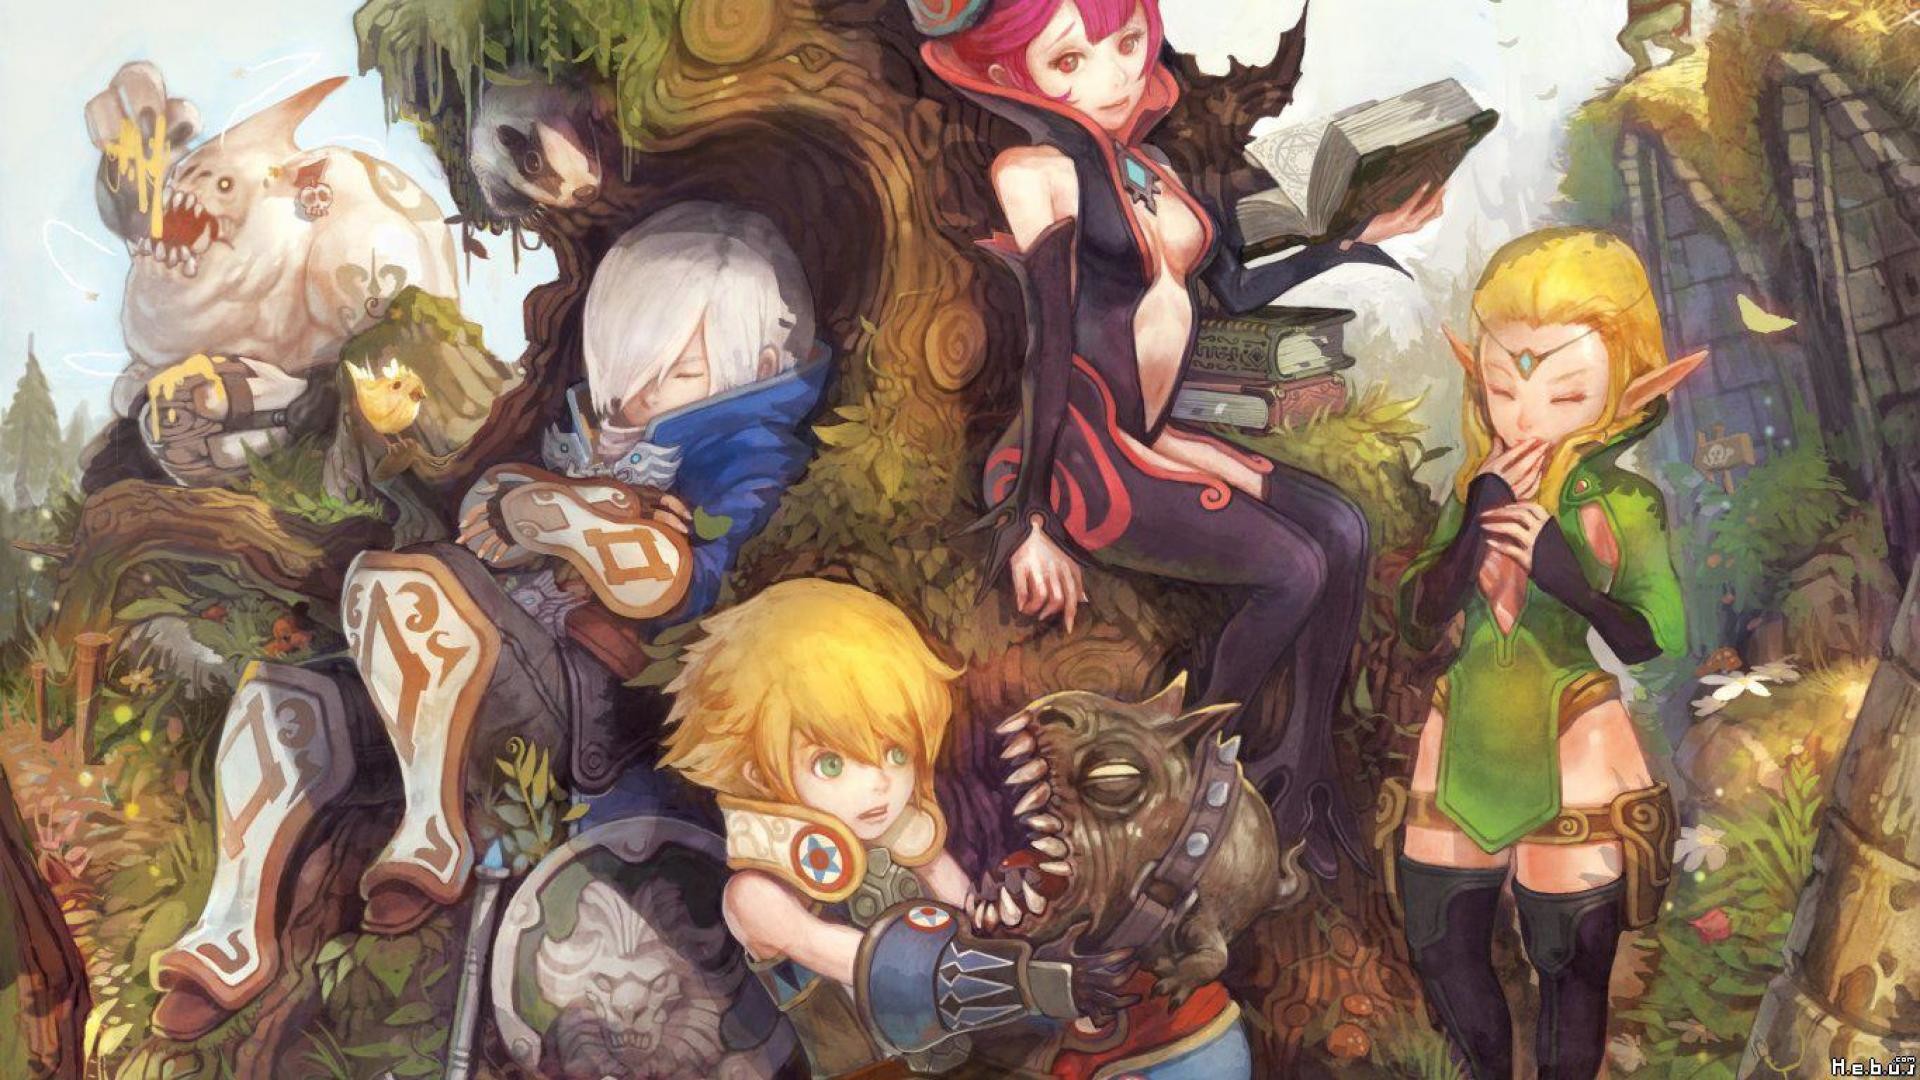 1920x1080 Good Dragon Nest Background Images HQ for Computer ...